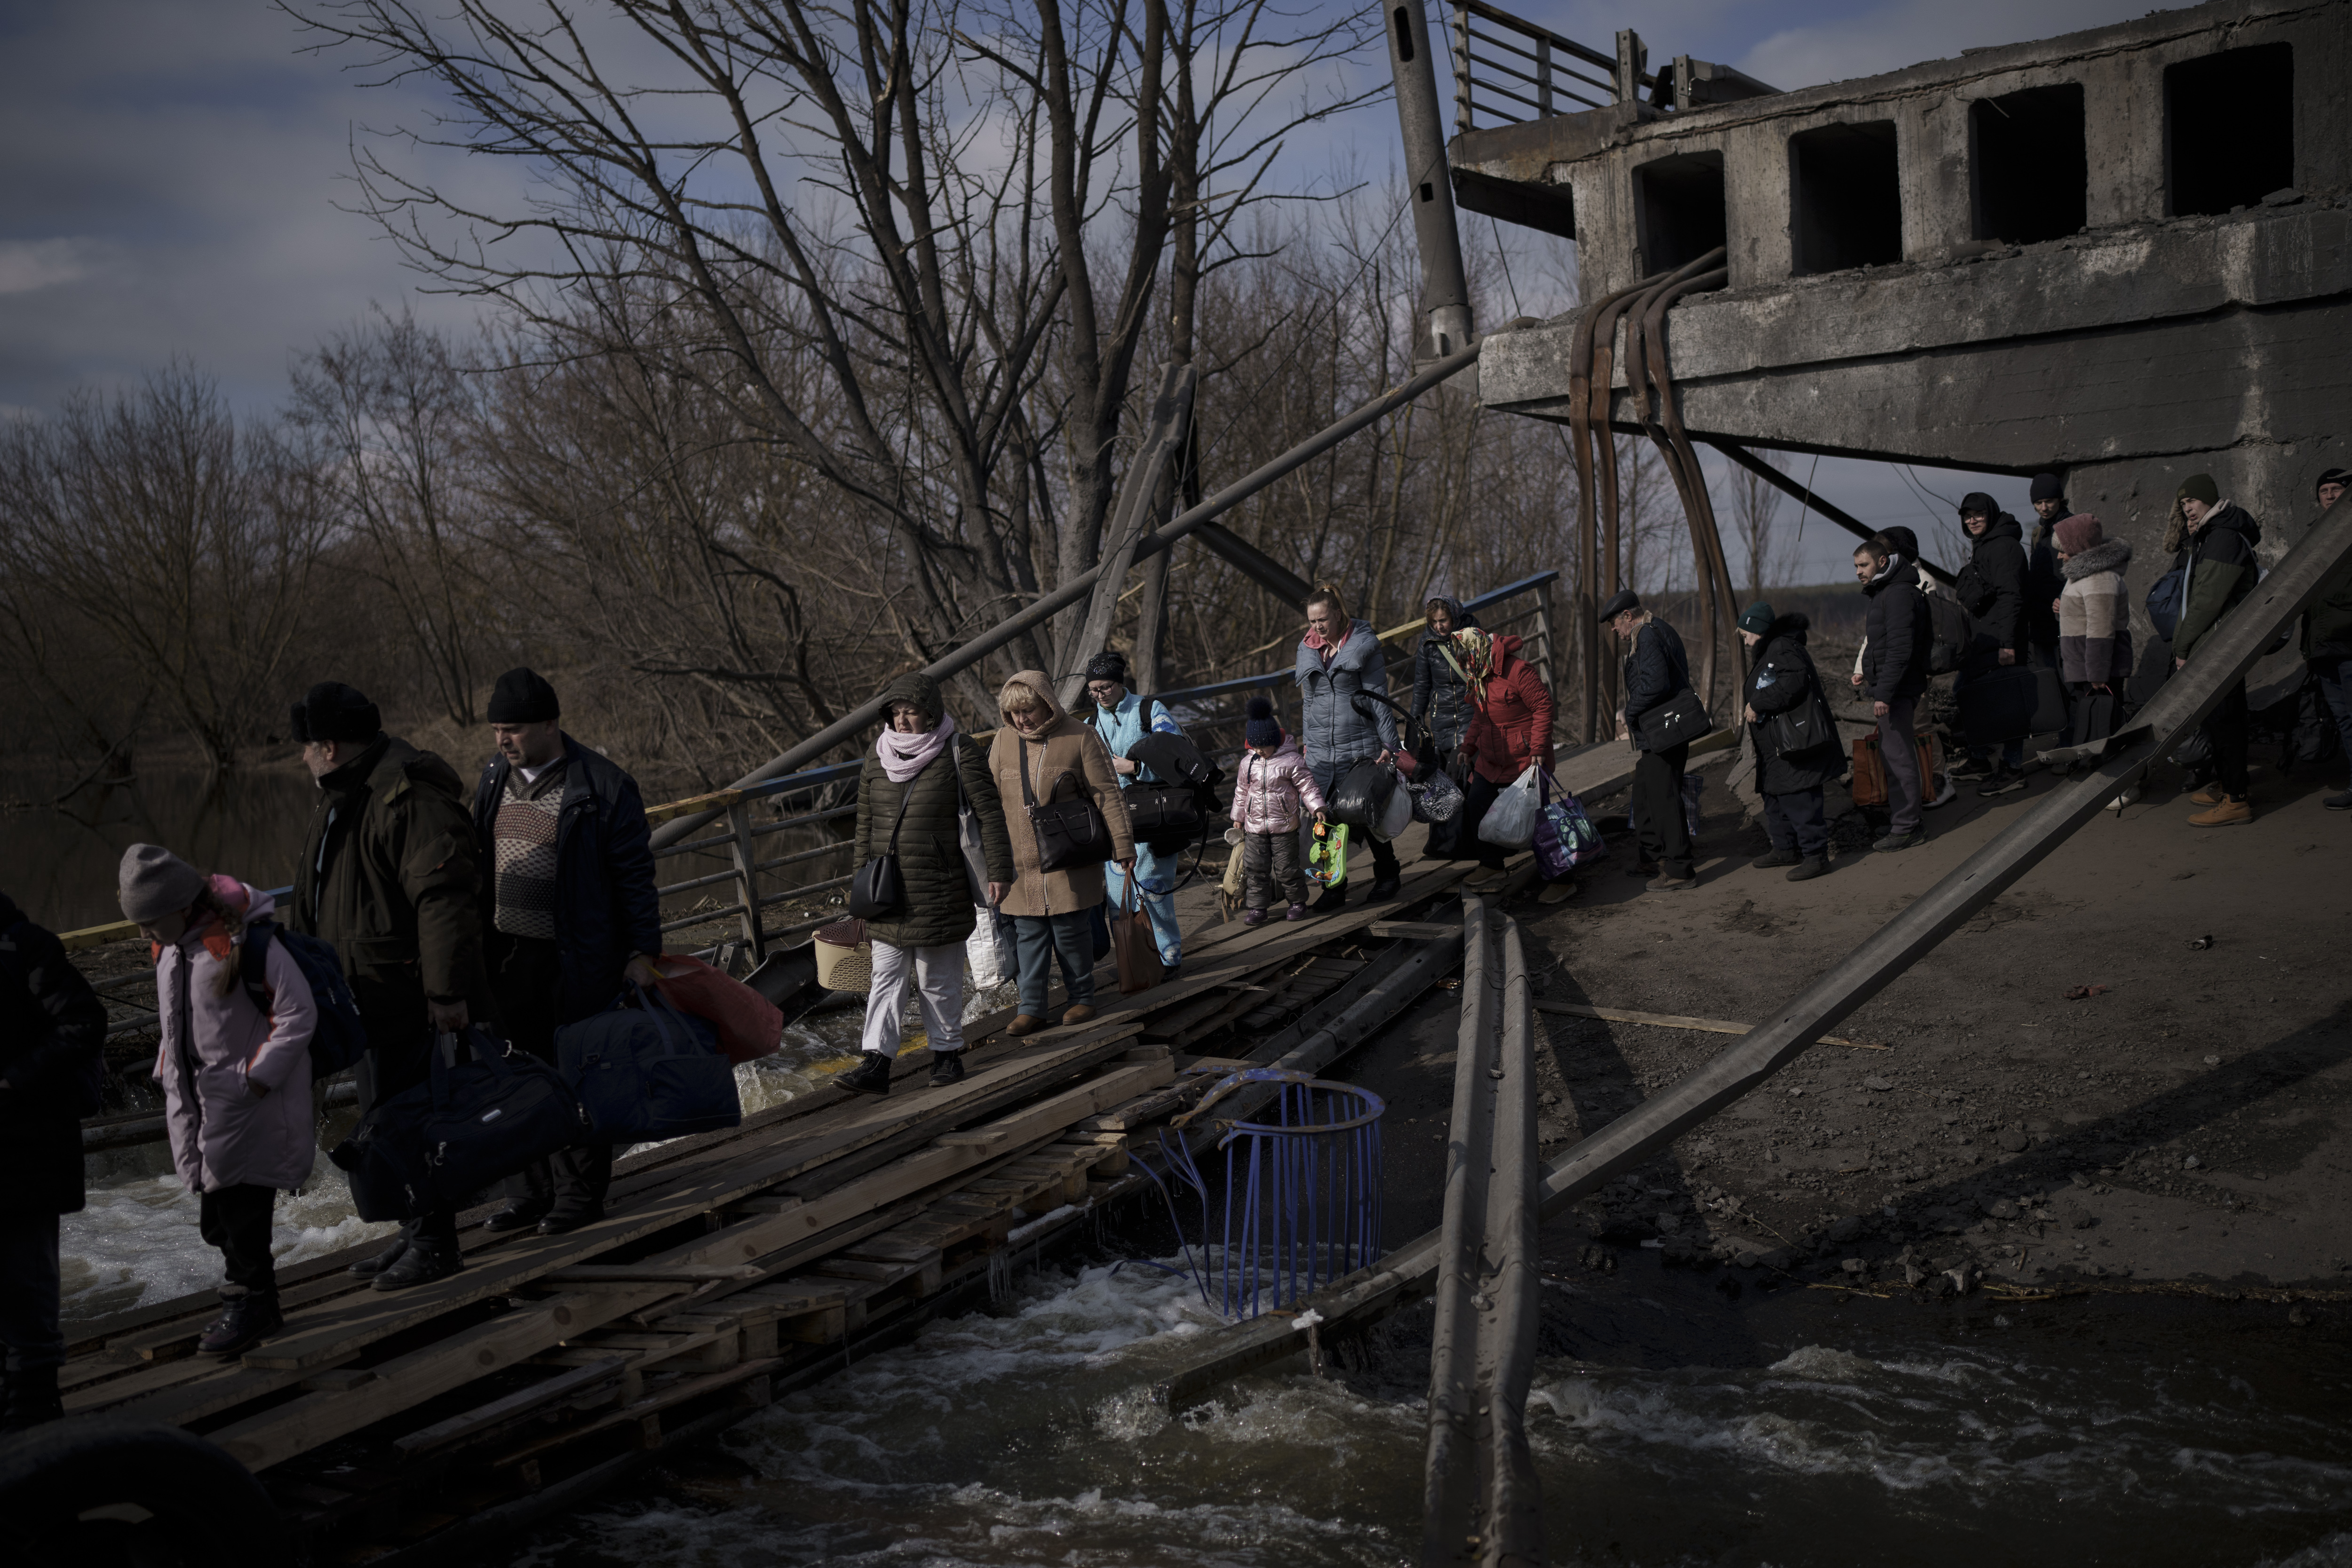 Ukrainians cross an improvised path under a destroyed bridge while fleeing Irpin, on the outskirts of Kyiv, Ukraine, Wednesday, March 9, 2022 